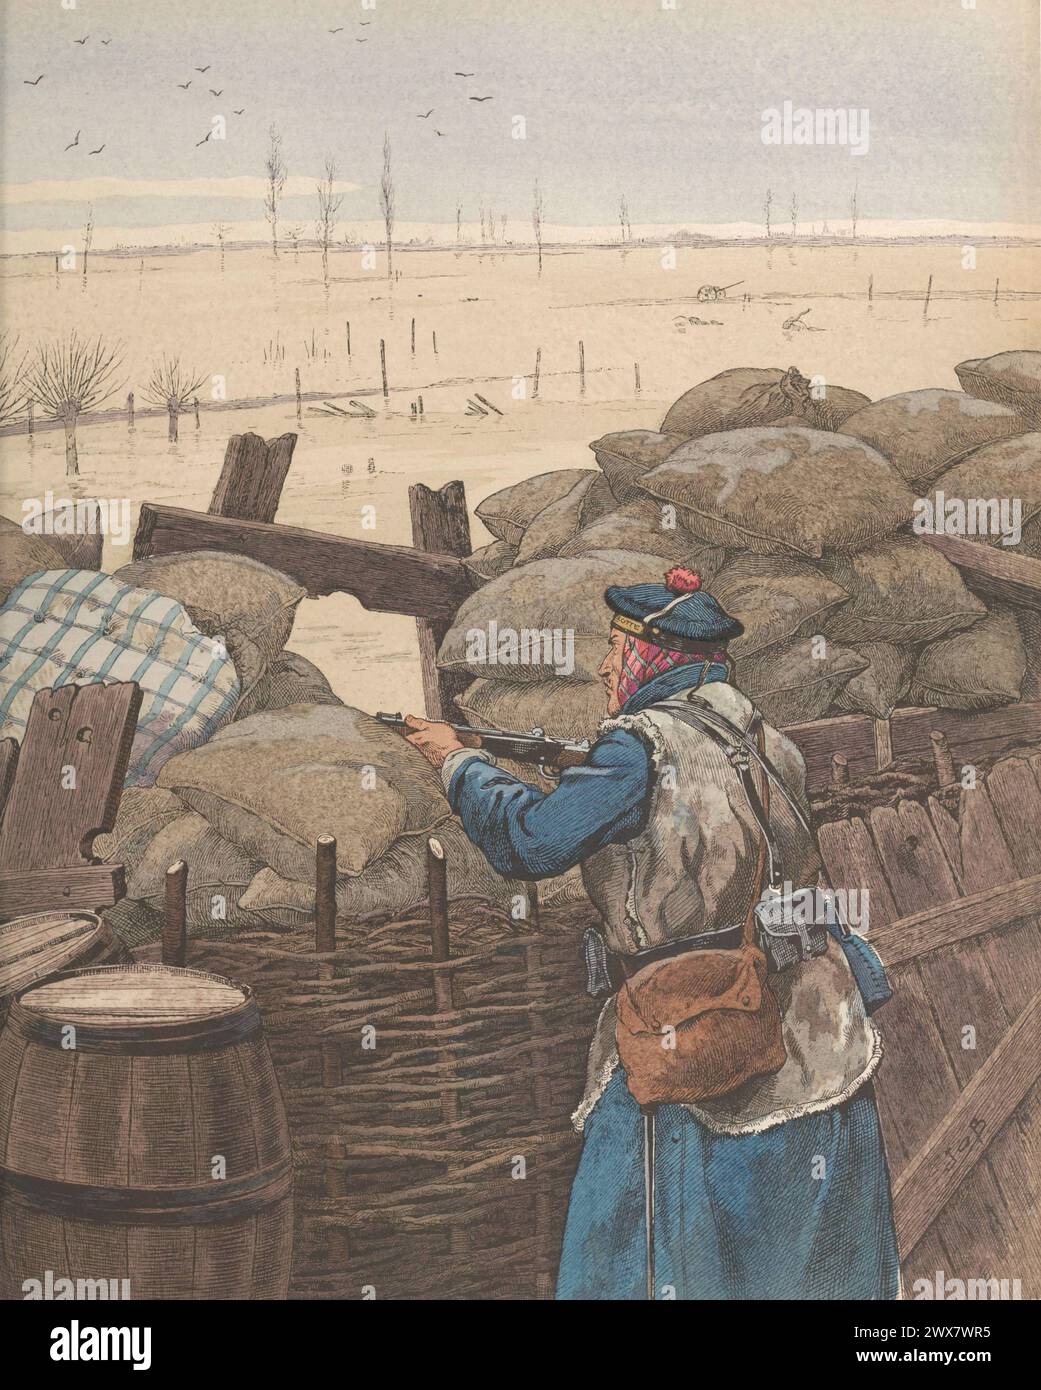 French Fusilier marin during the First World War.  Illustration by Job published in the book 'Allons, Enfants de la Patrie !...' by Jean Richepin. Published by A. Mame et fils in 1920. Stock Photo